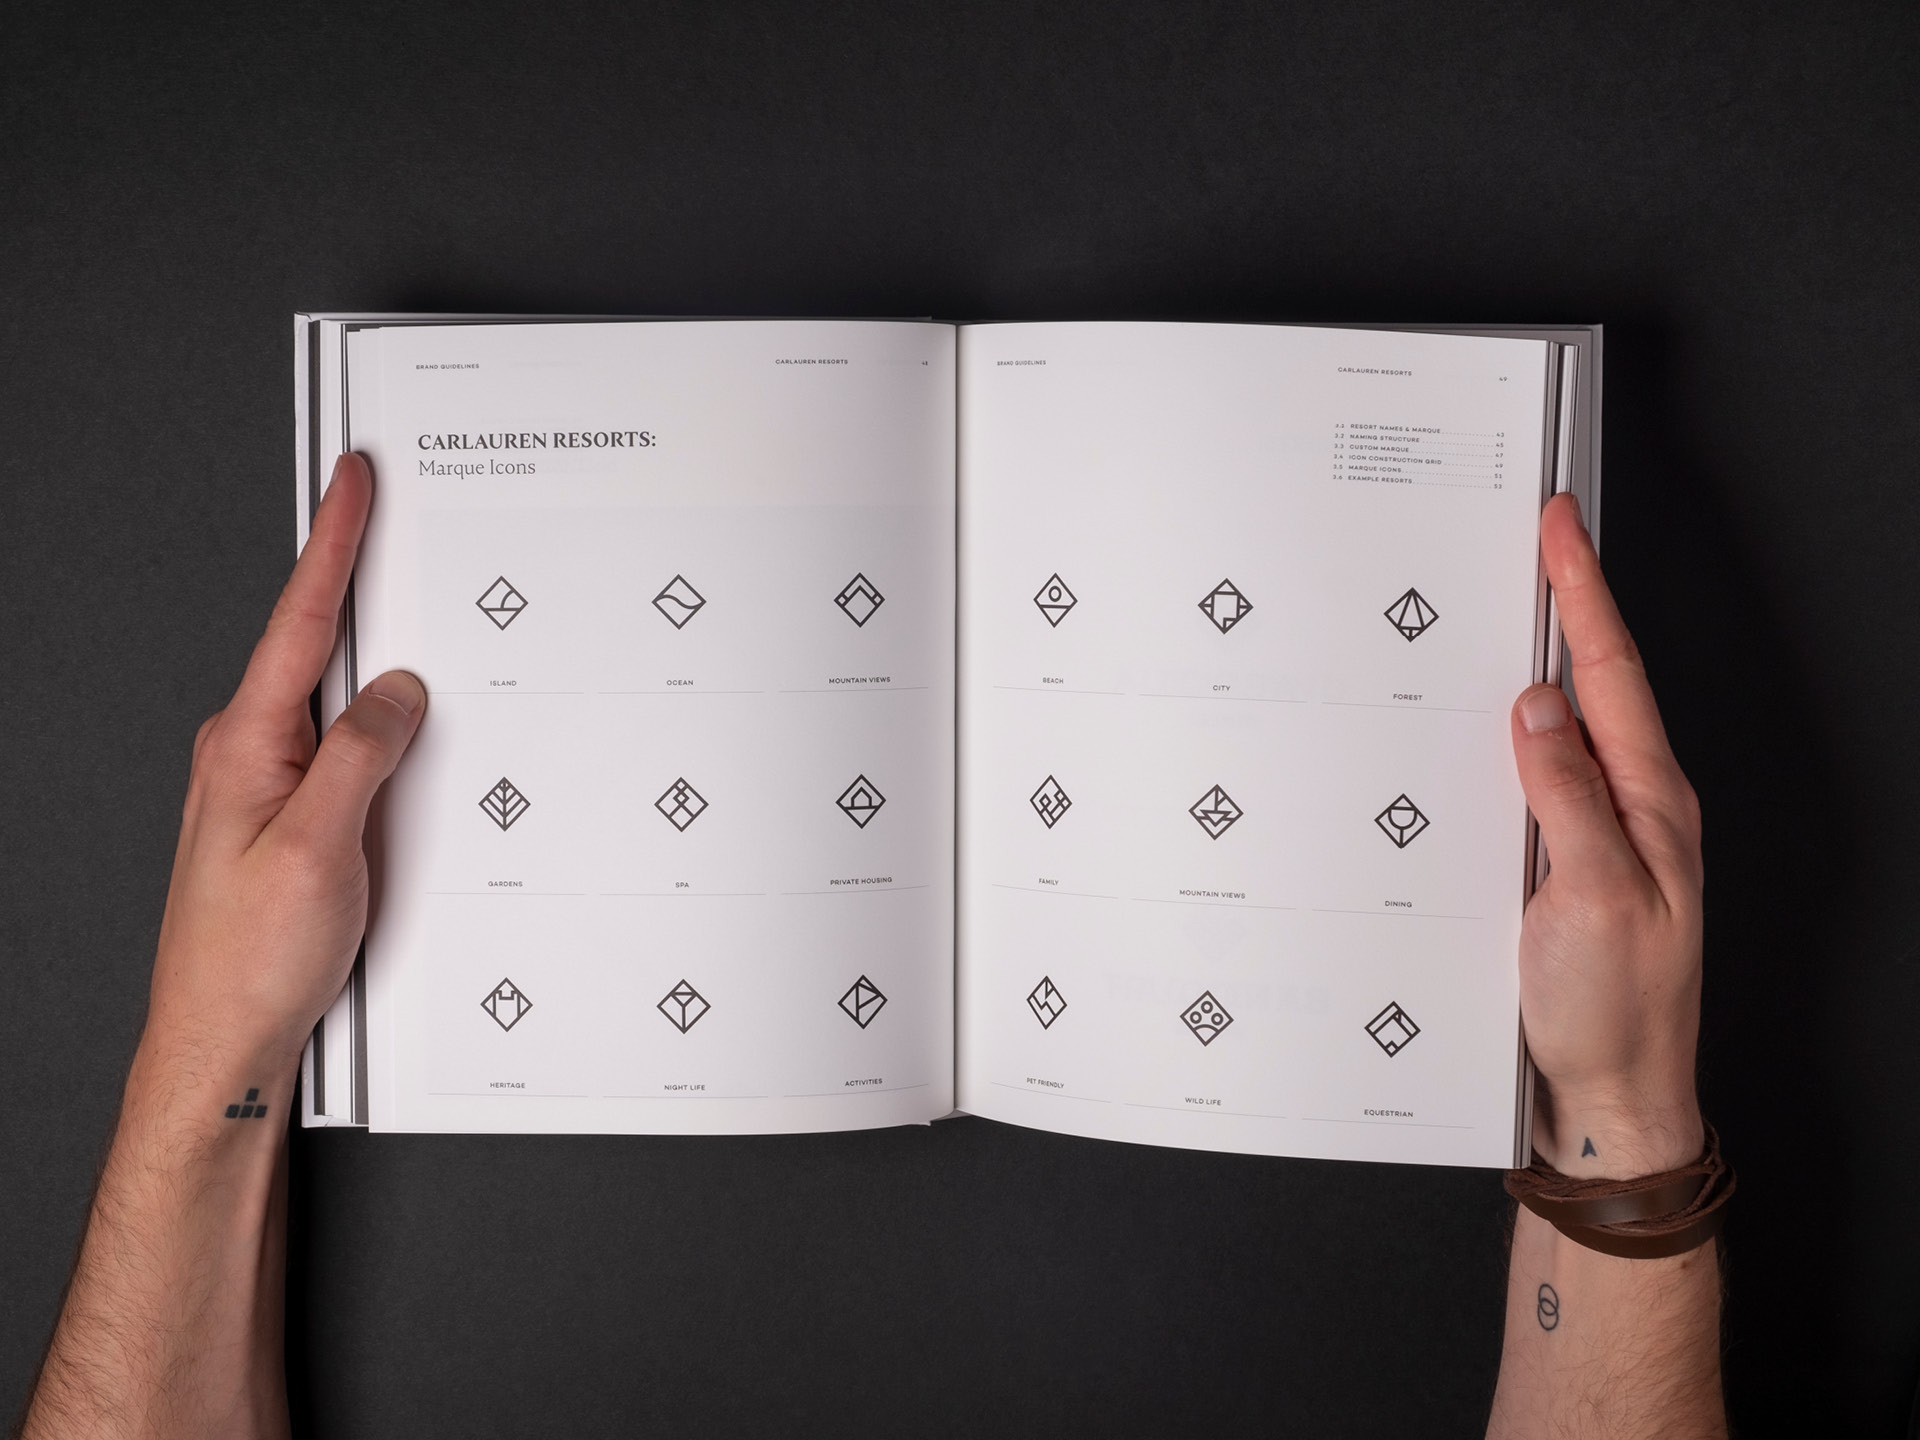 A printed spread from the Carlauren guidelines featuring the various iconography used in the brand marque